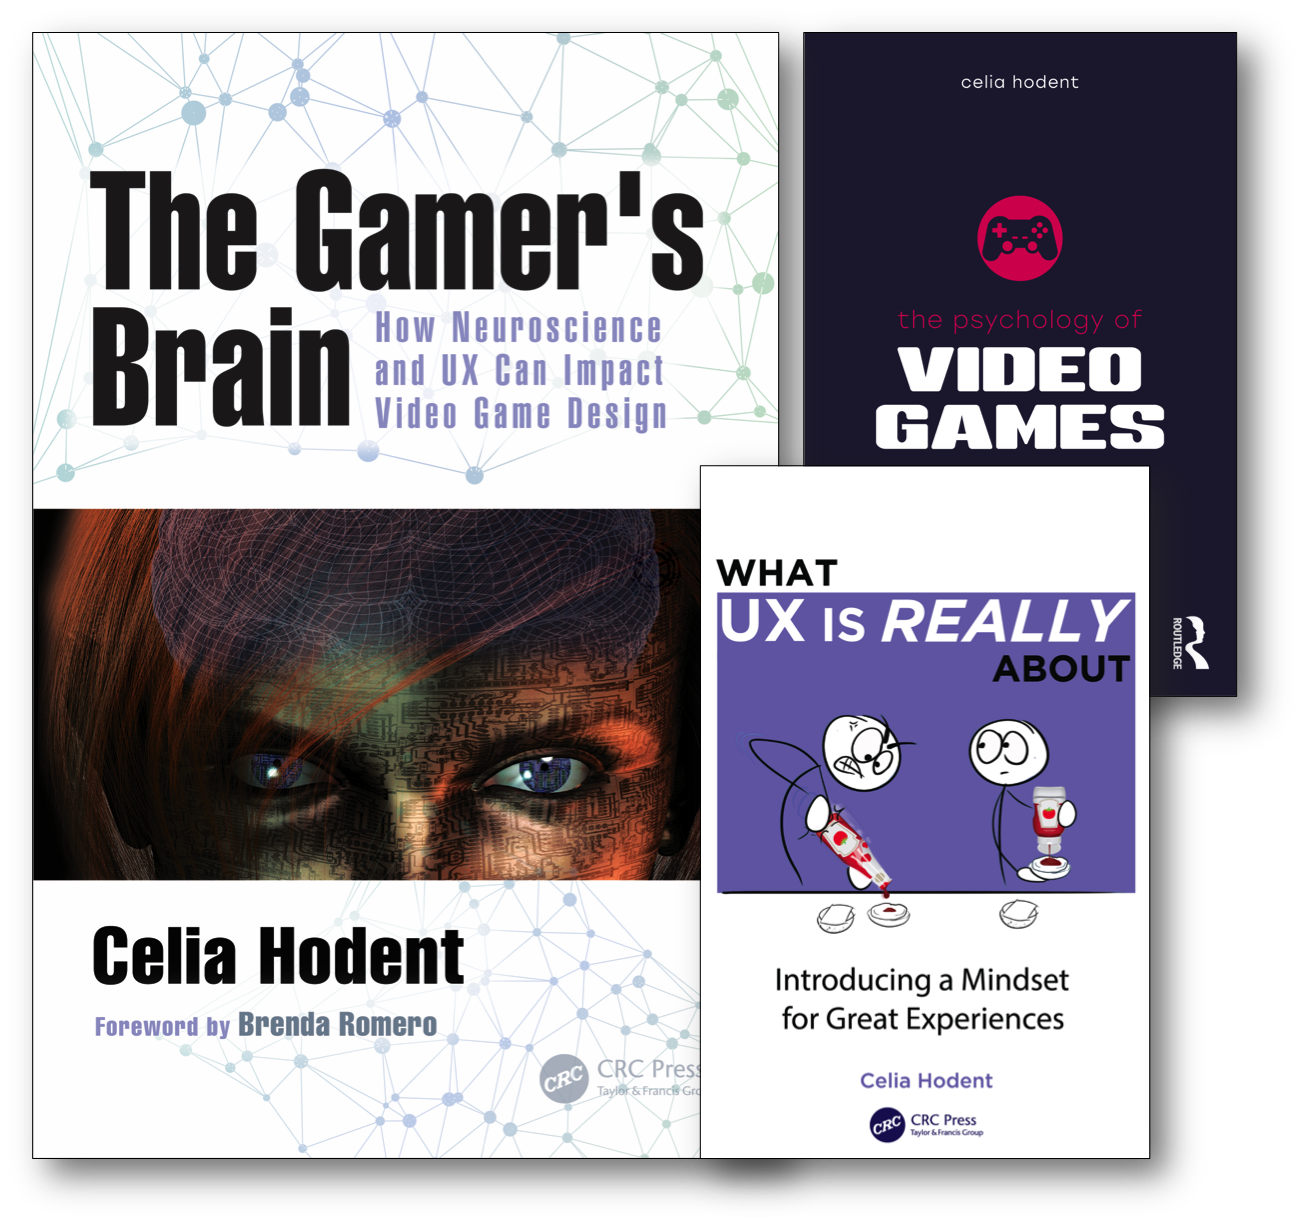 Les livres de Celia Hodent: The Gamer's Brain, The Psychology of Video games et What UX Is Really About